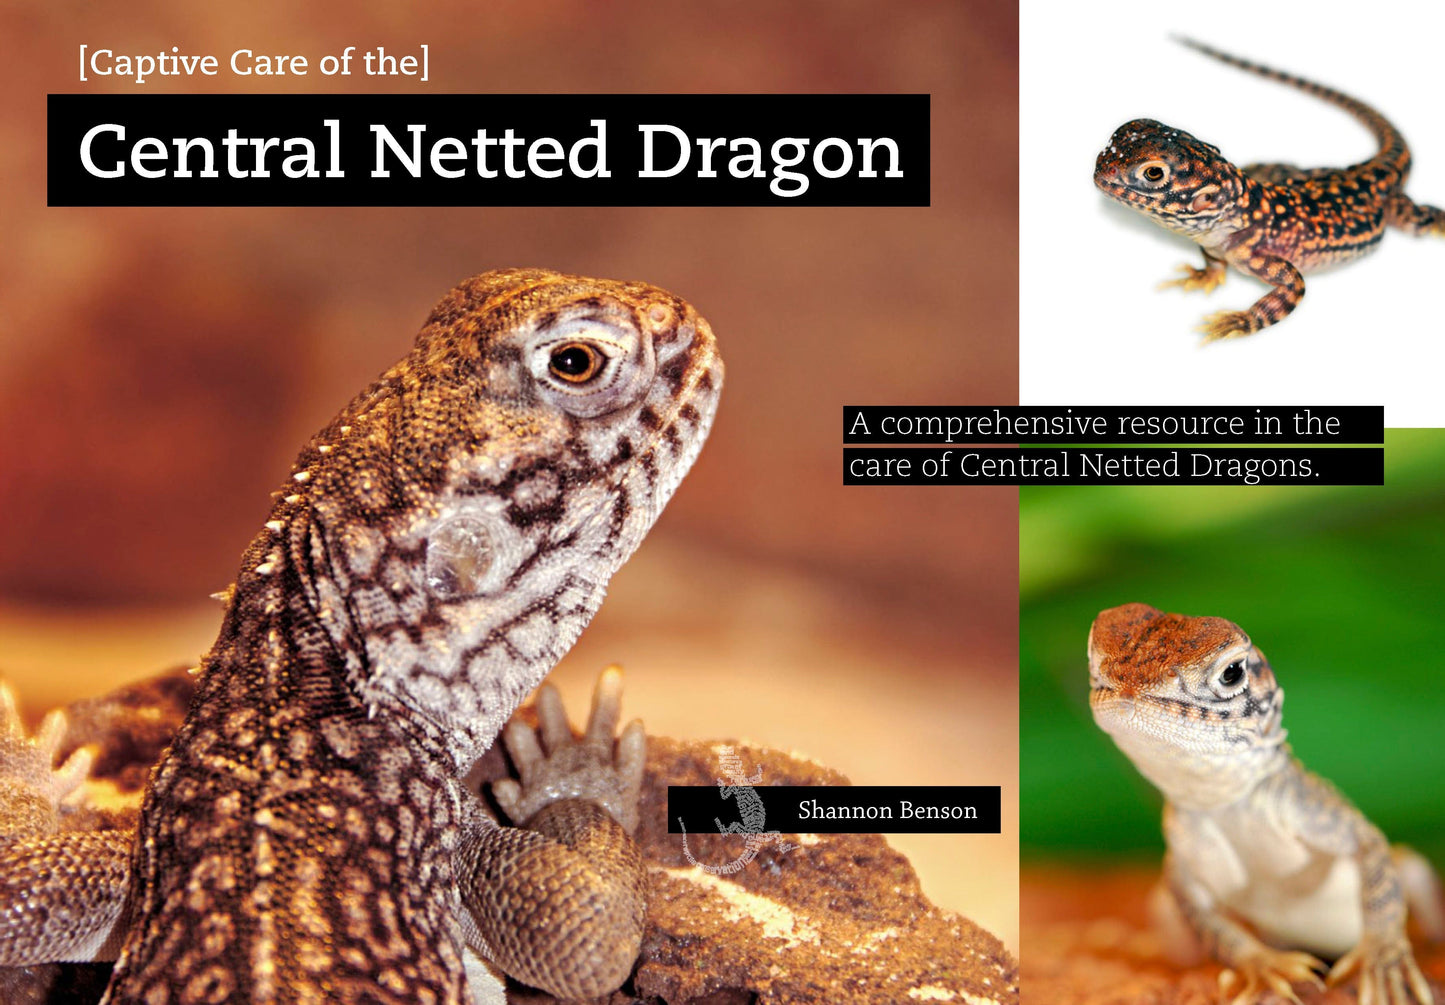 Captive Care of the Central Netted Dragon